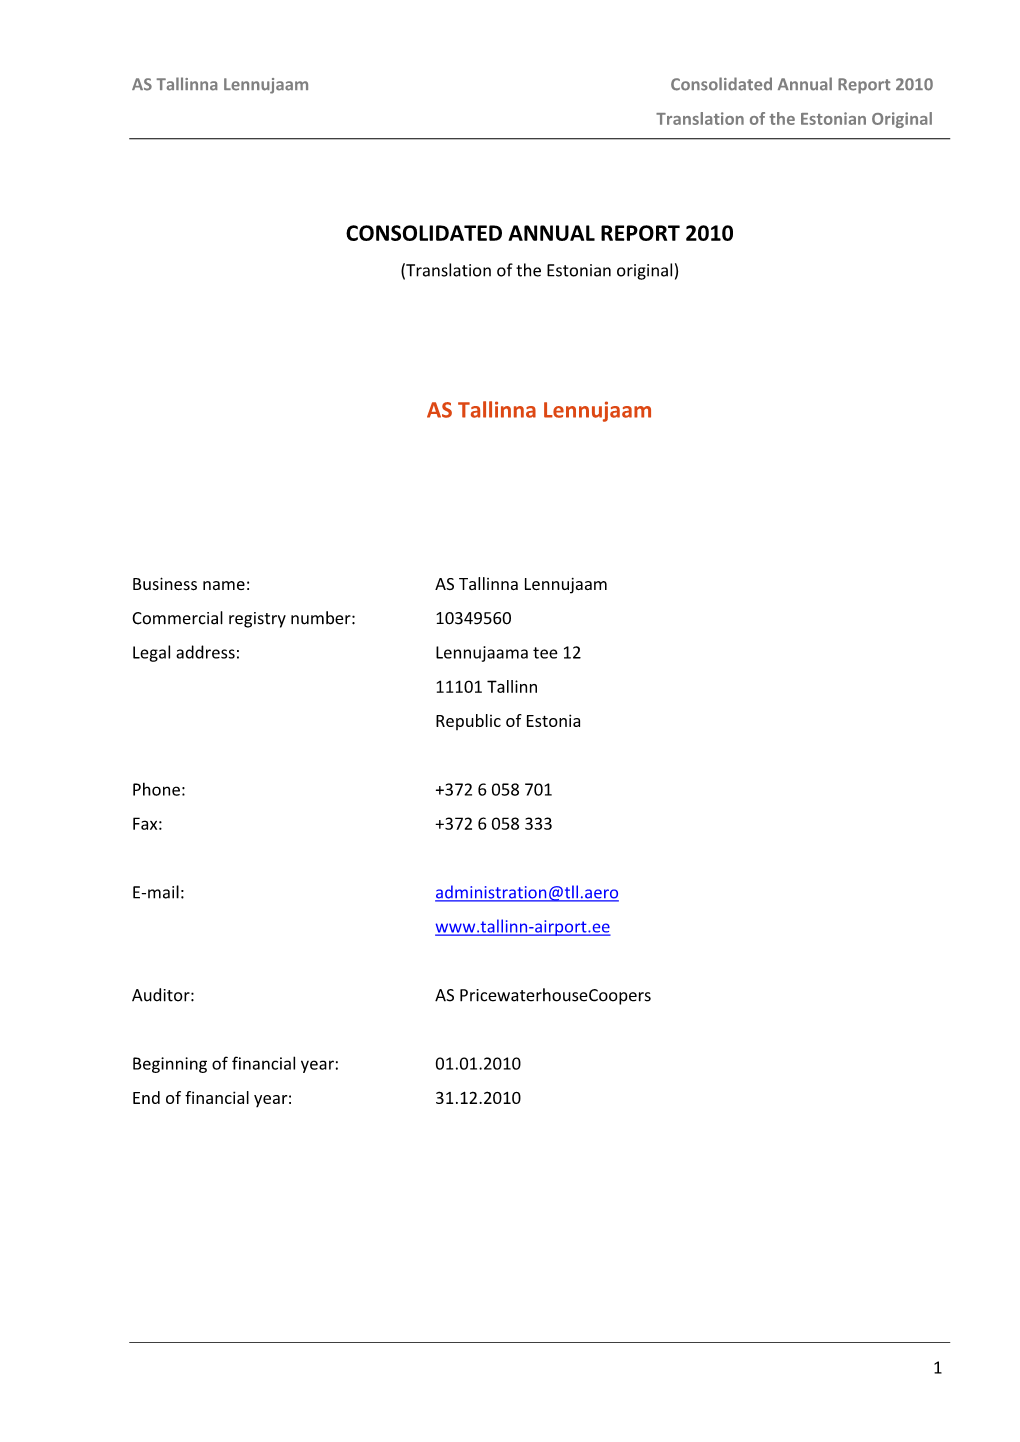 CONSOLIDATED ANNUAL REPORT 2010 AS Tallinna Lennujaam